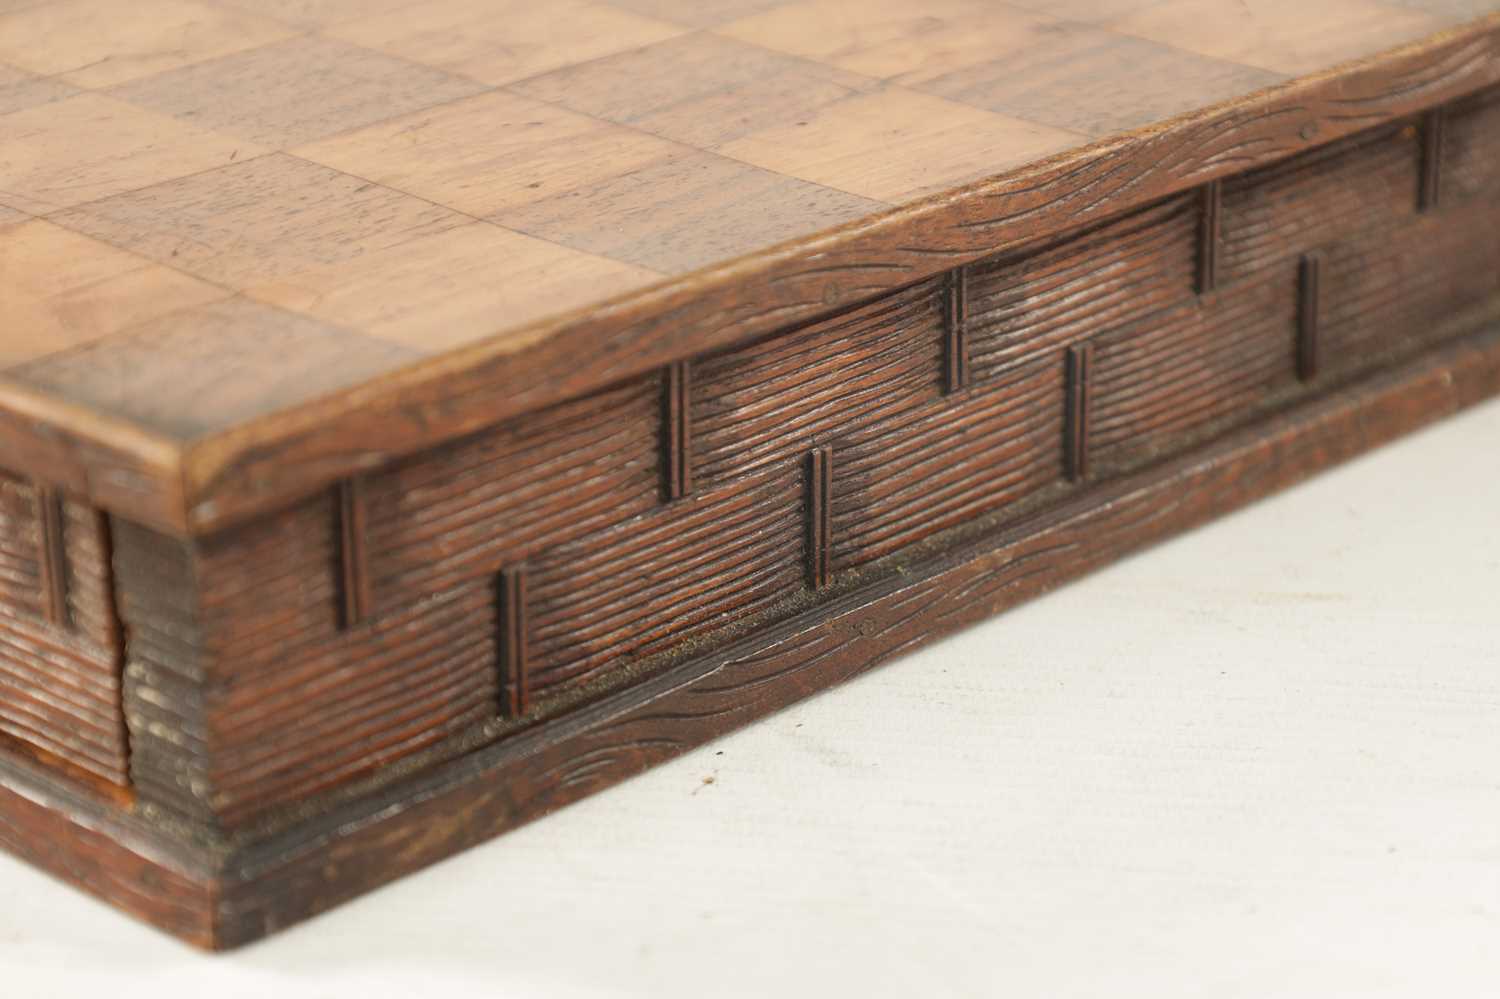 A 19TH CENTURY CARVED WOOD DOUBLE SIDED CHESS BOARD - Image 4 of 5